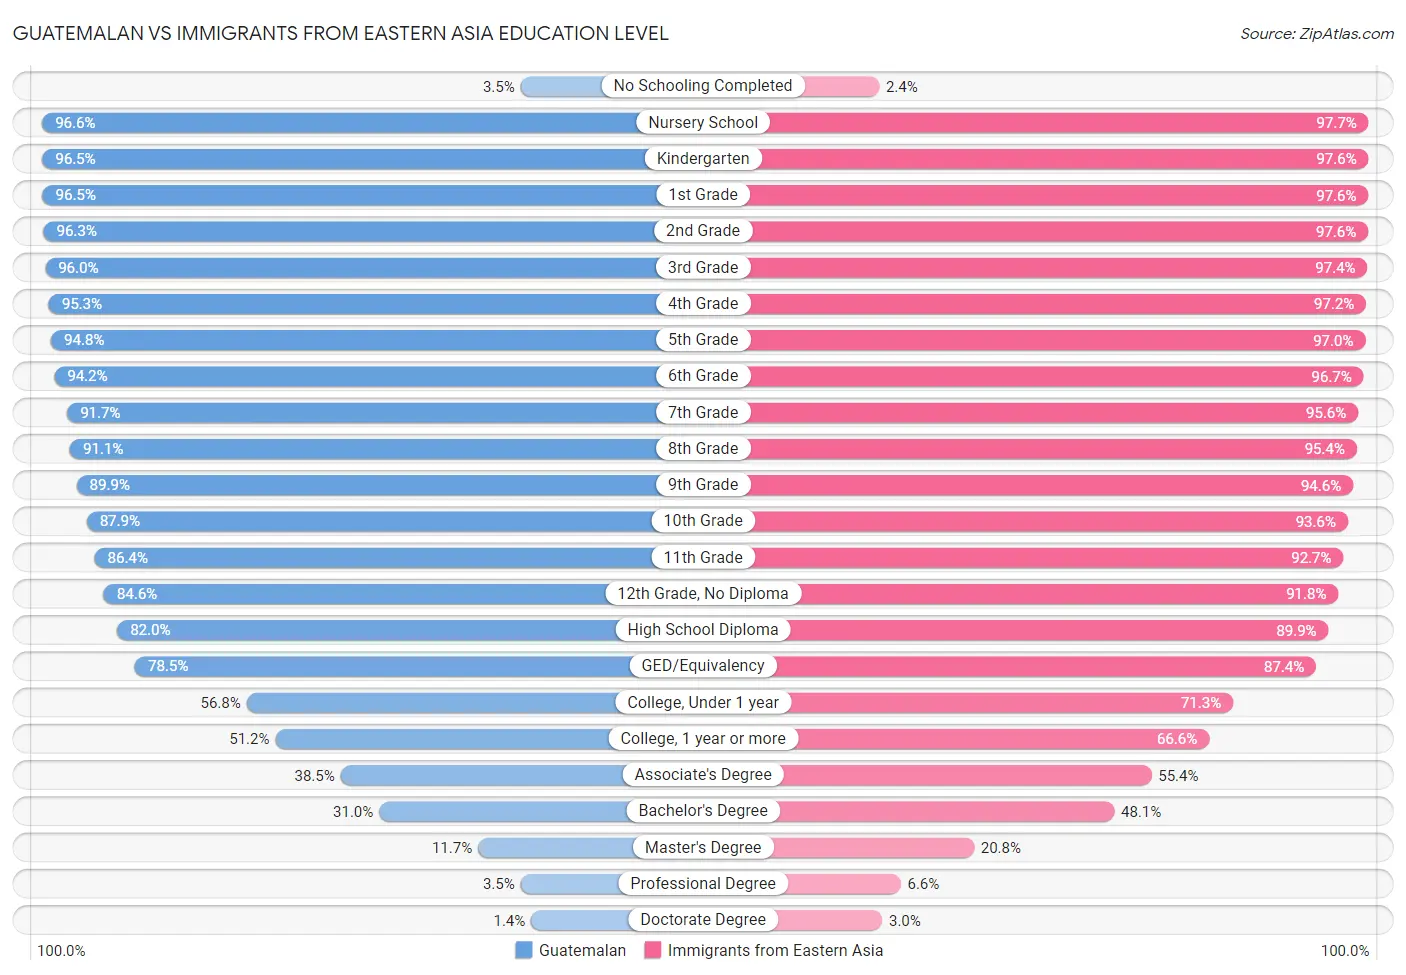 Guatemalan vs Immigrants from Eastern Asia Education Level